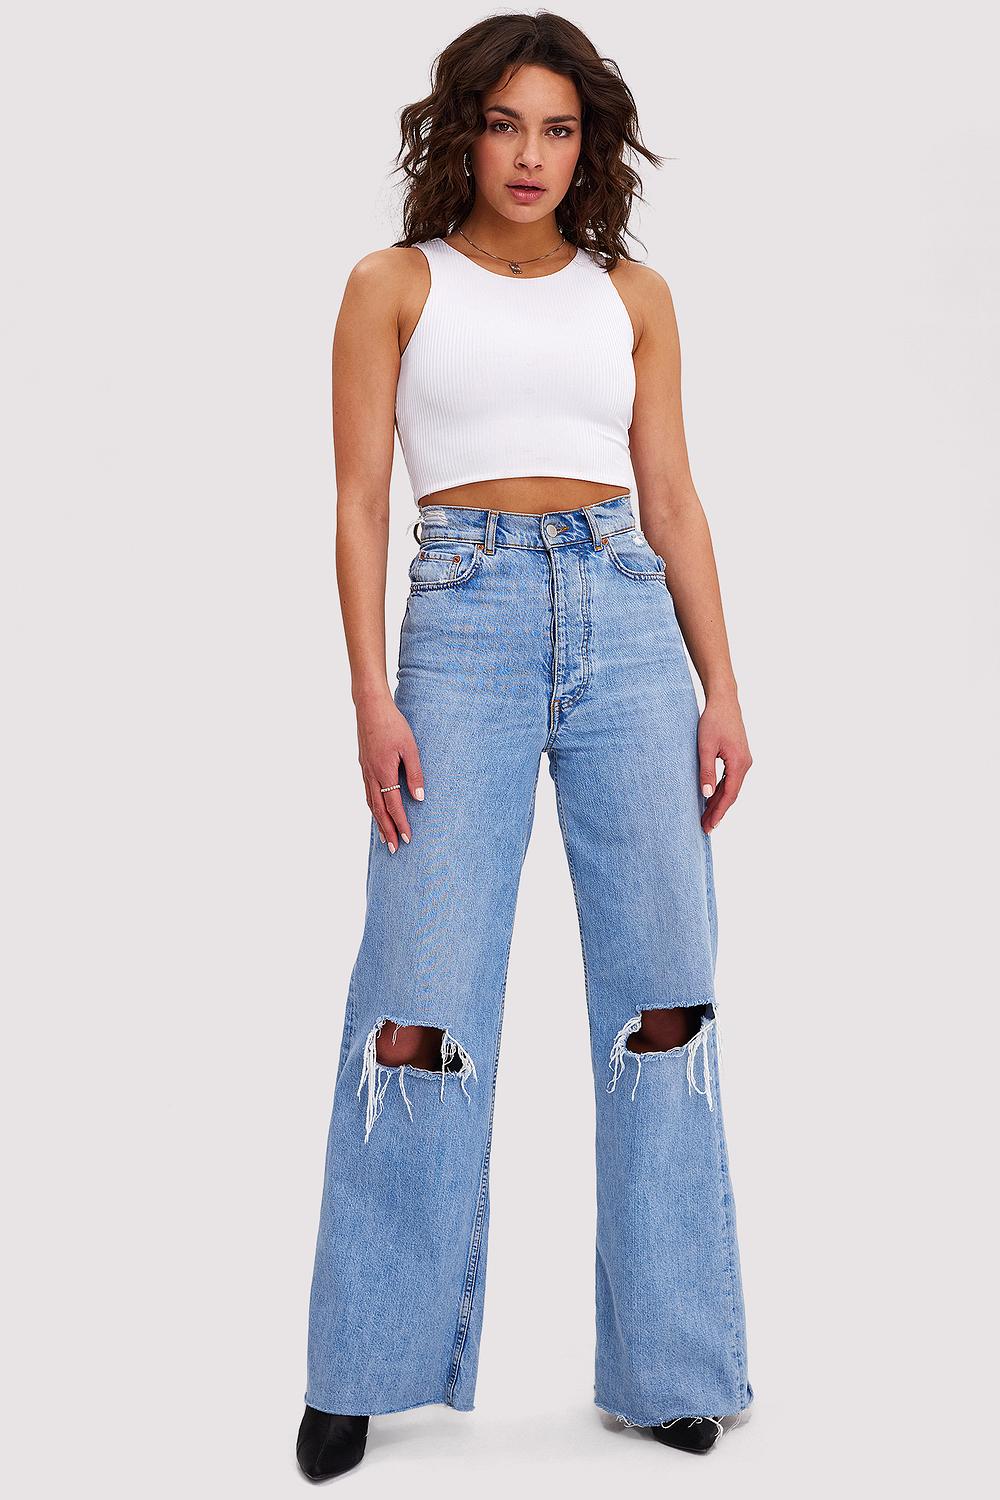 Blauwe high wide fit jeans